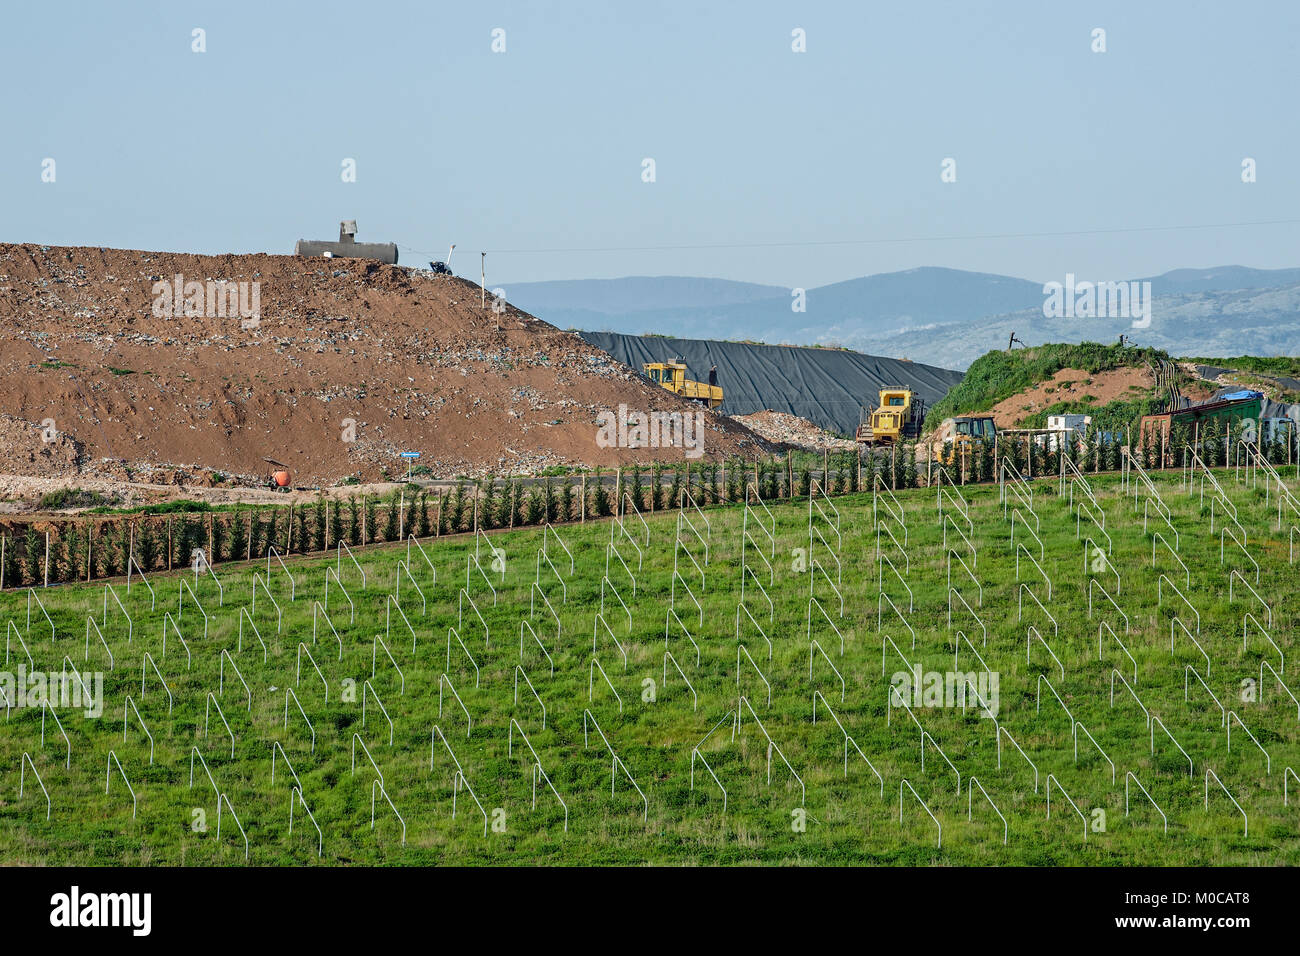 Rubbish dump and unfinished photovoltaic field Stock Photo